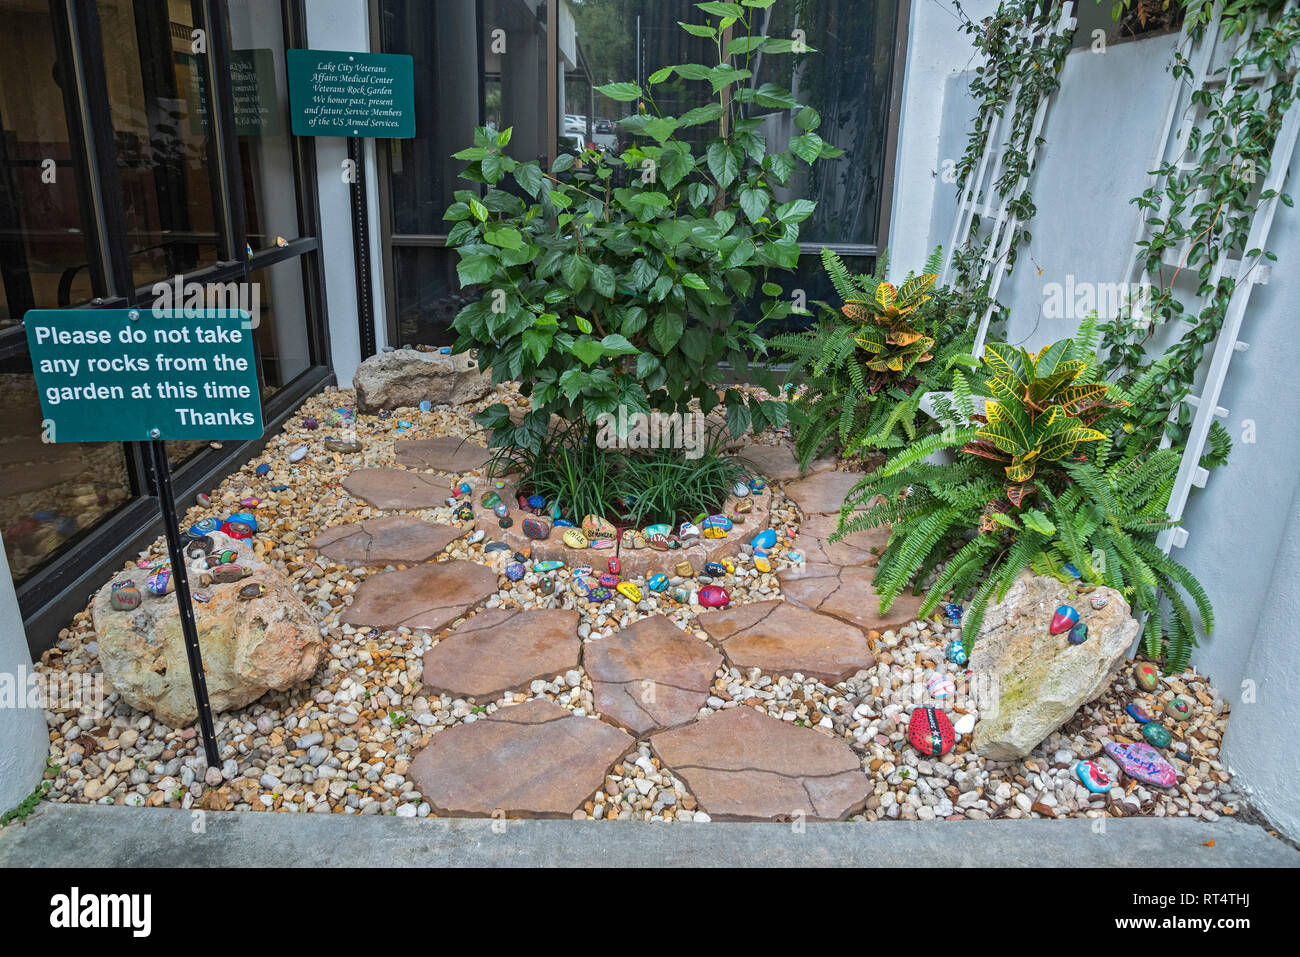 Stone Garden at the Lake City, Florida Veterans Administration Medical Center.  The stones are hand-painted and placed in a small garden near the entr Stock Photo